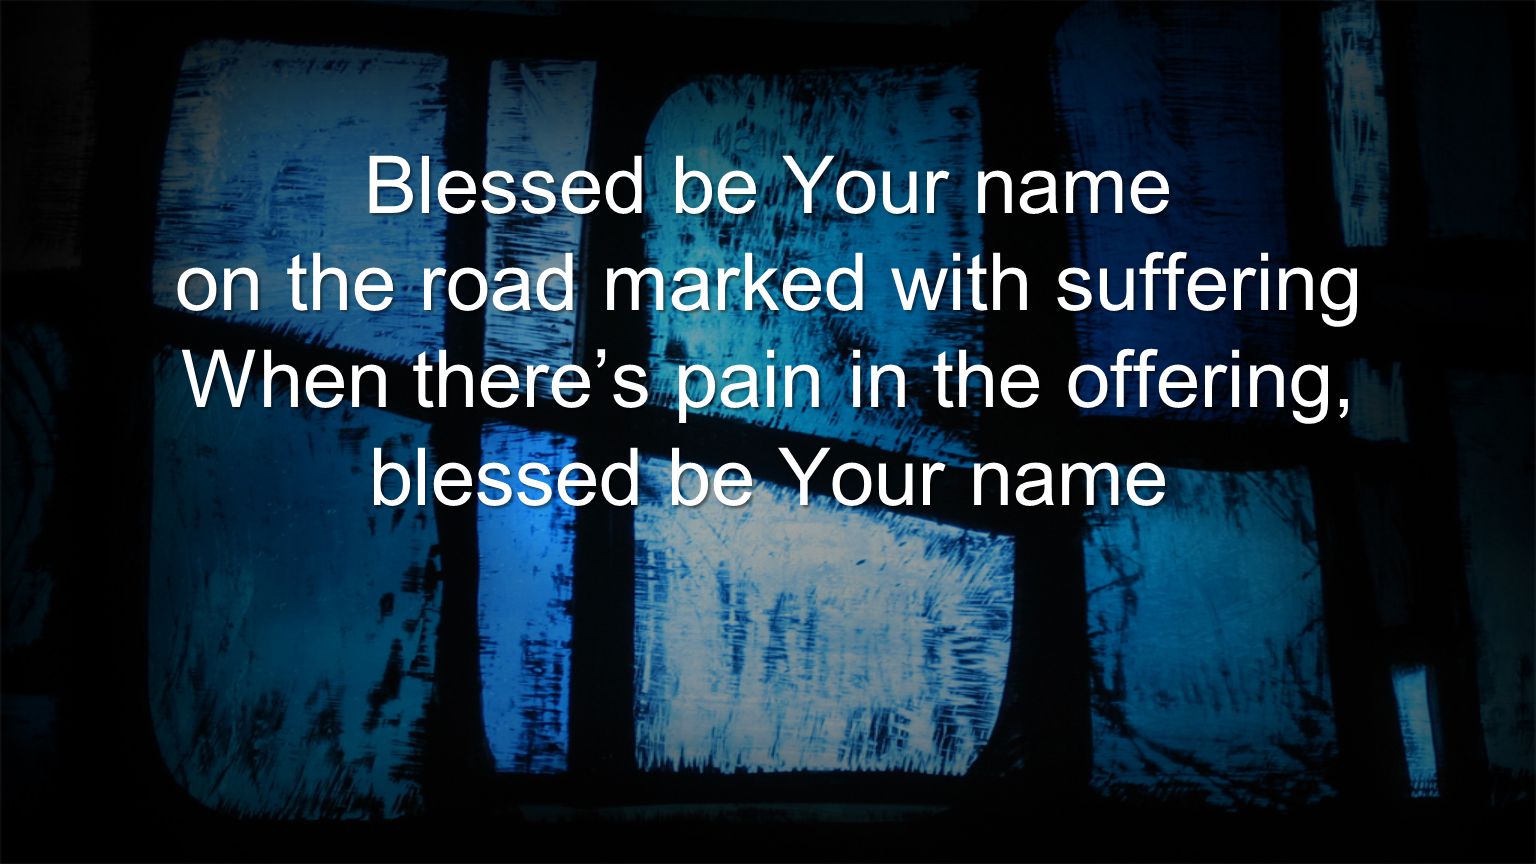 on the road marked with suffering When there’s pain in the offering,